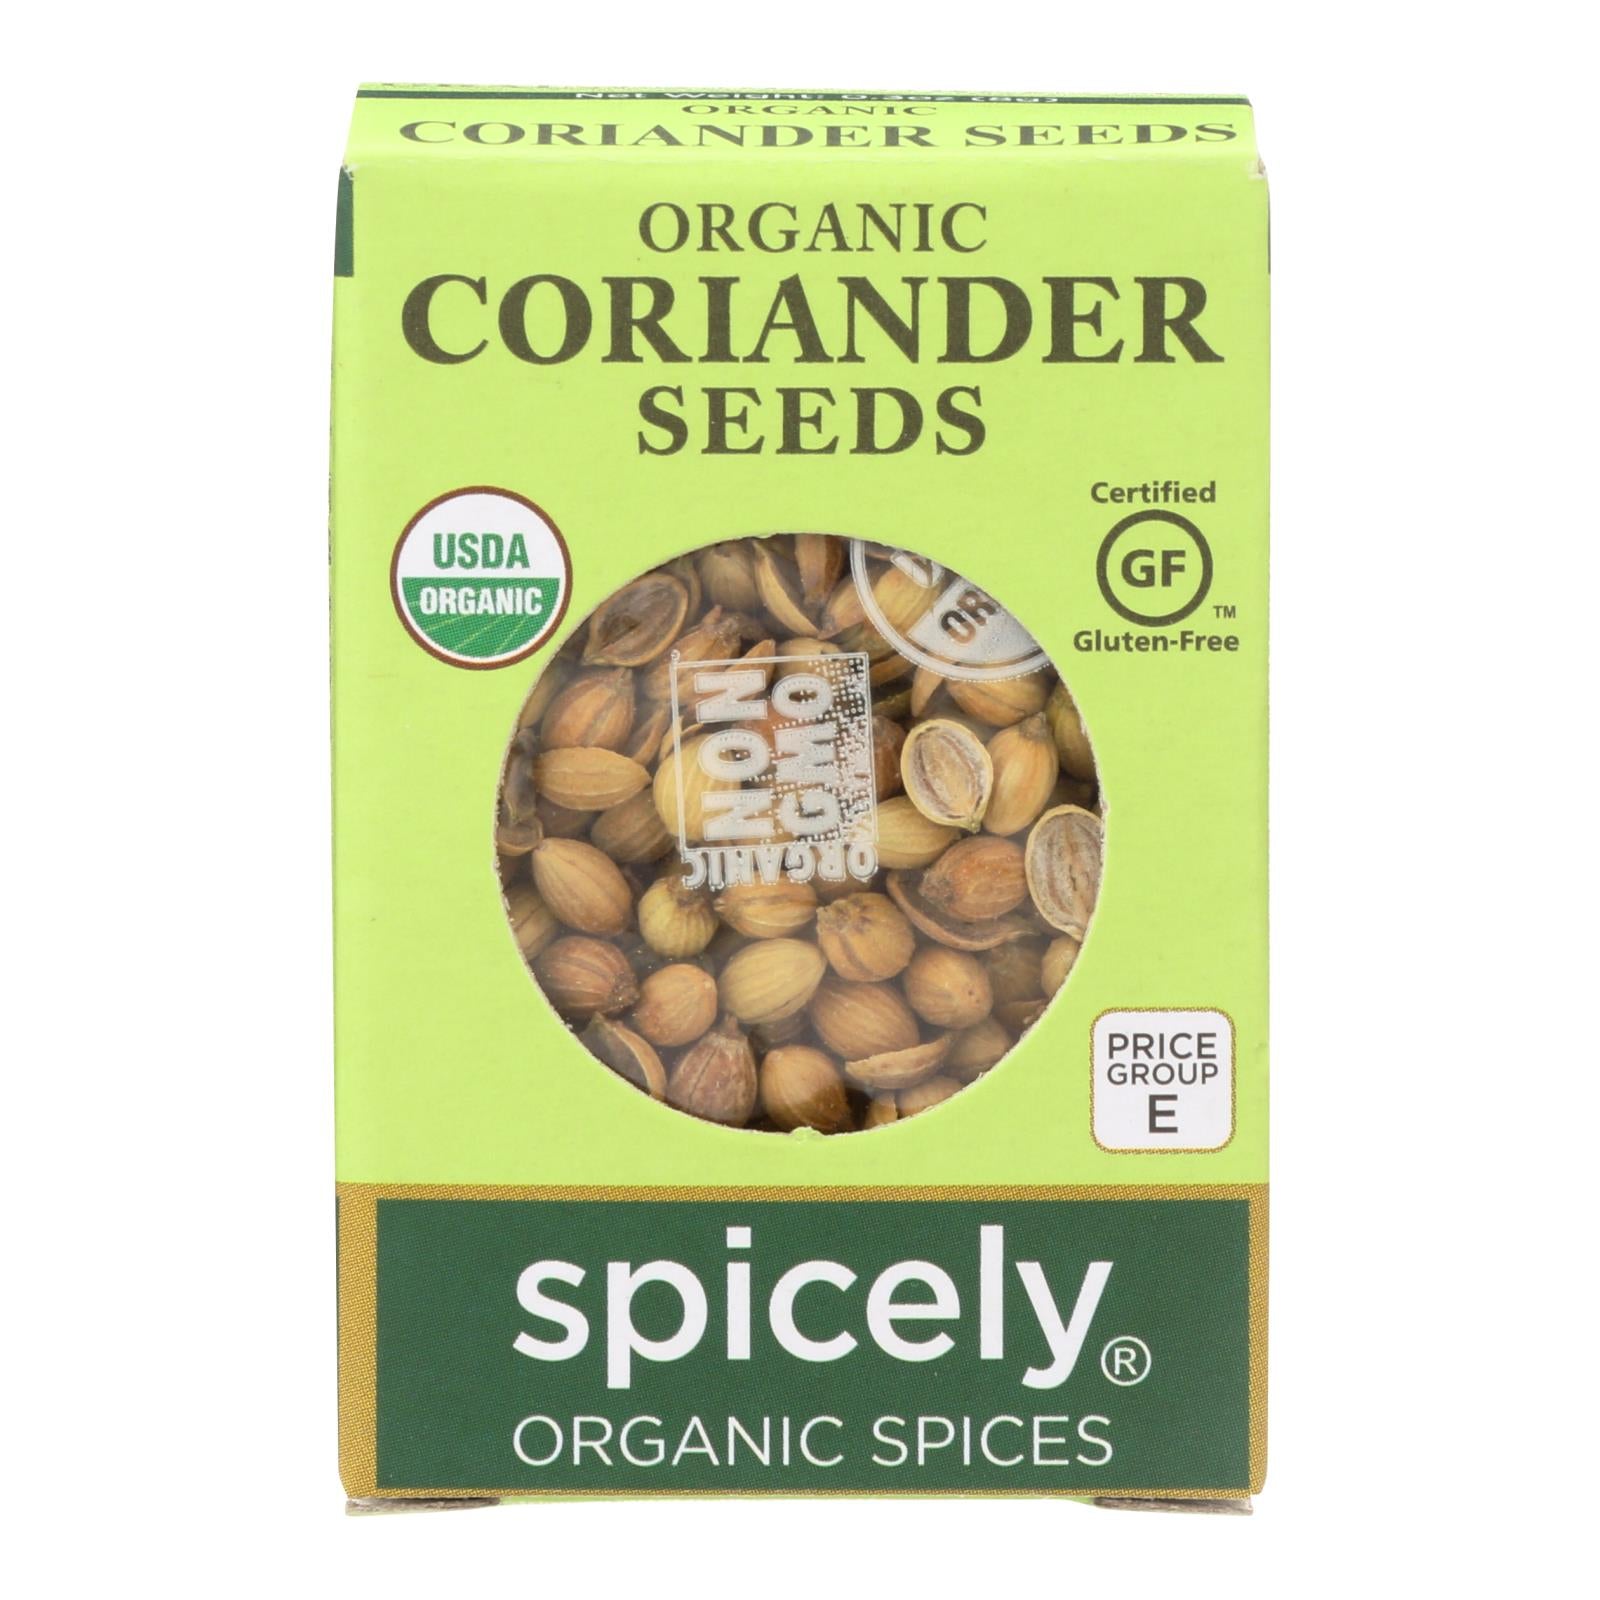 Spicely Organics - Organic Coriander Seed - Case Of 6 - 0.3 Oz. - Whole Green Foods